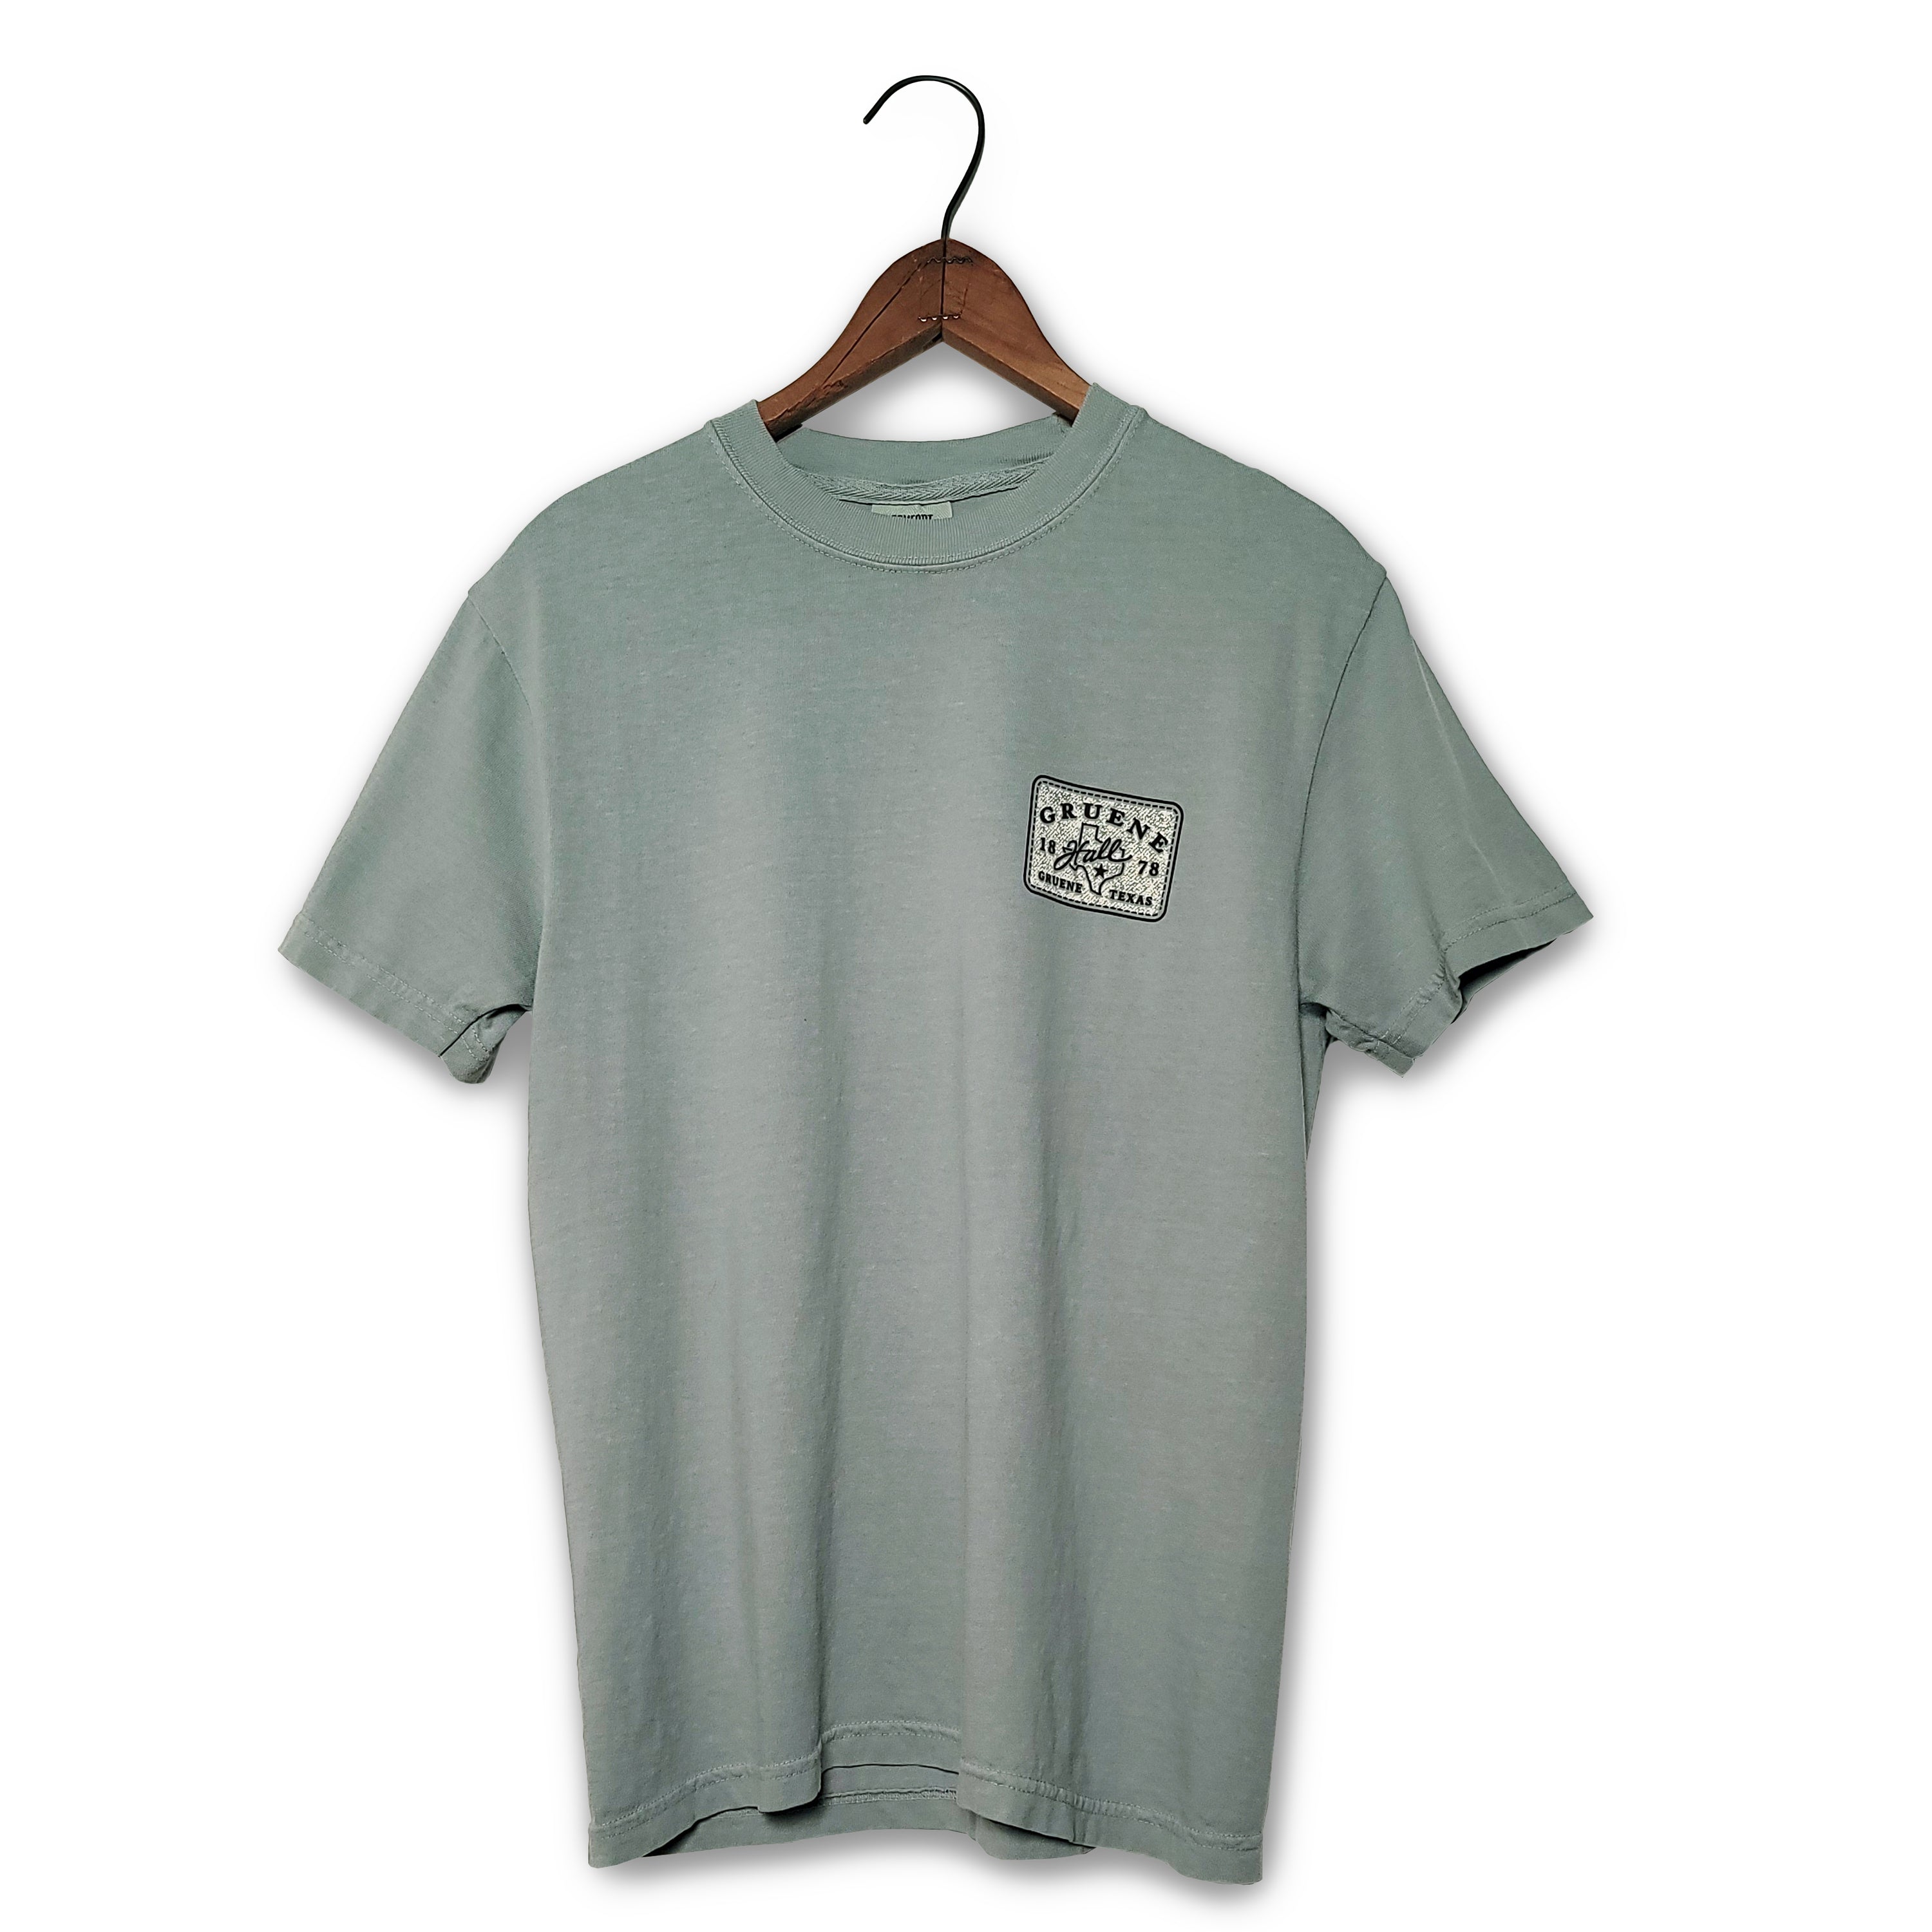 Gruene Hall Leather Patch Comfort Colors Tee